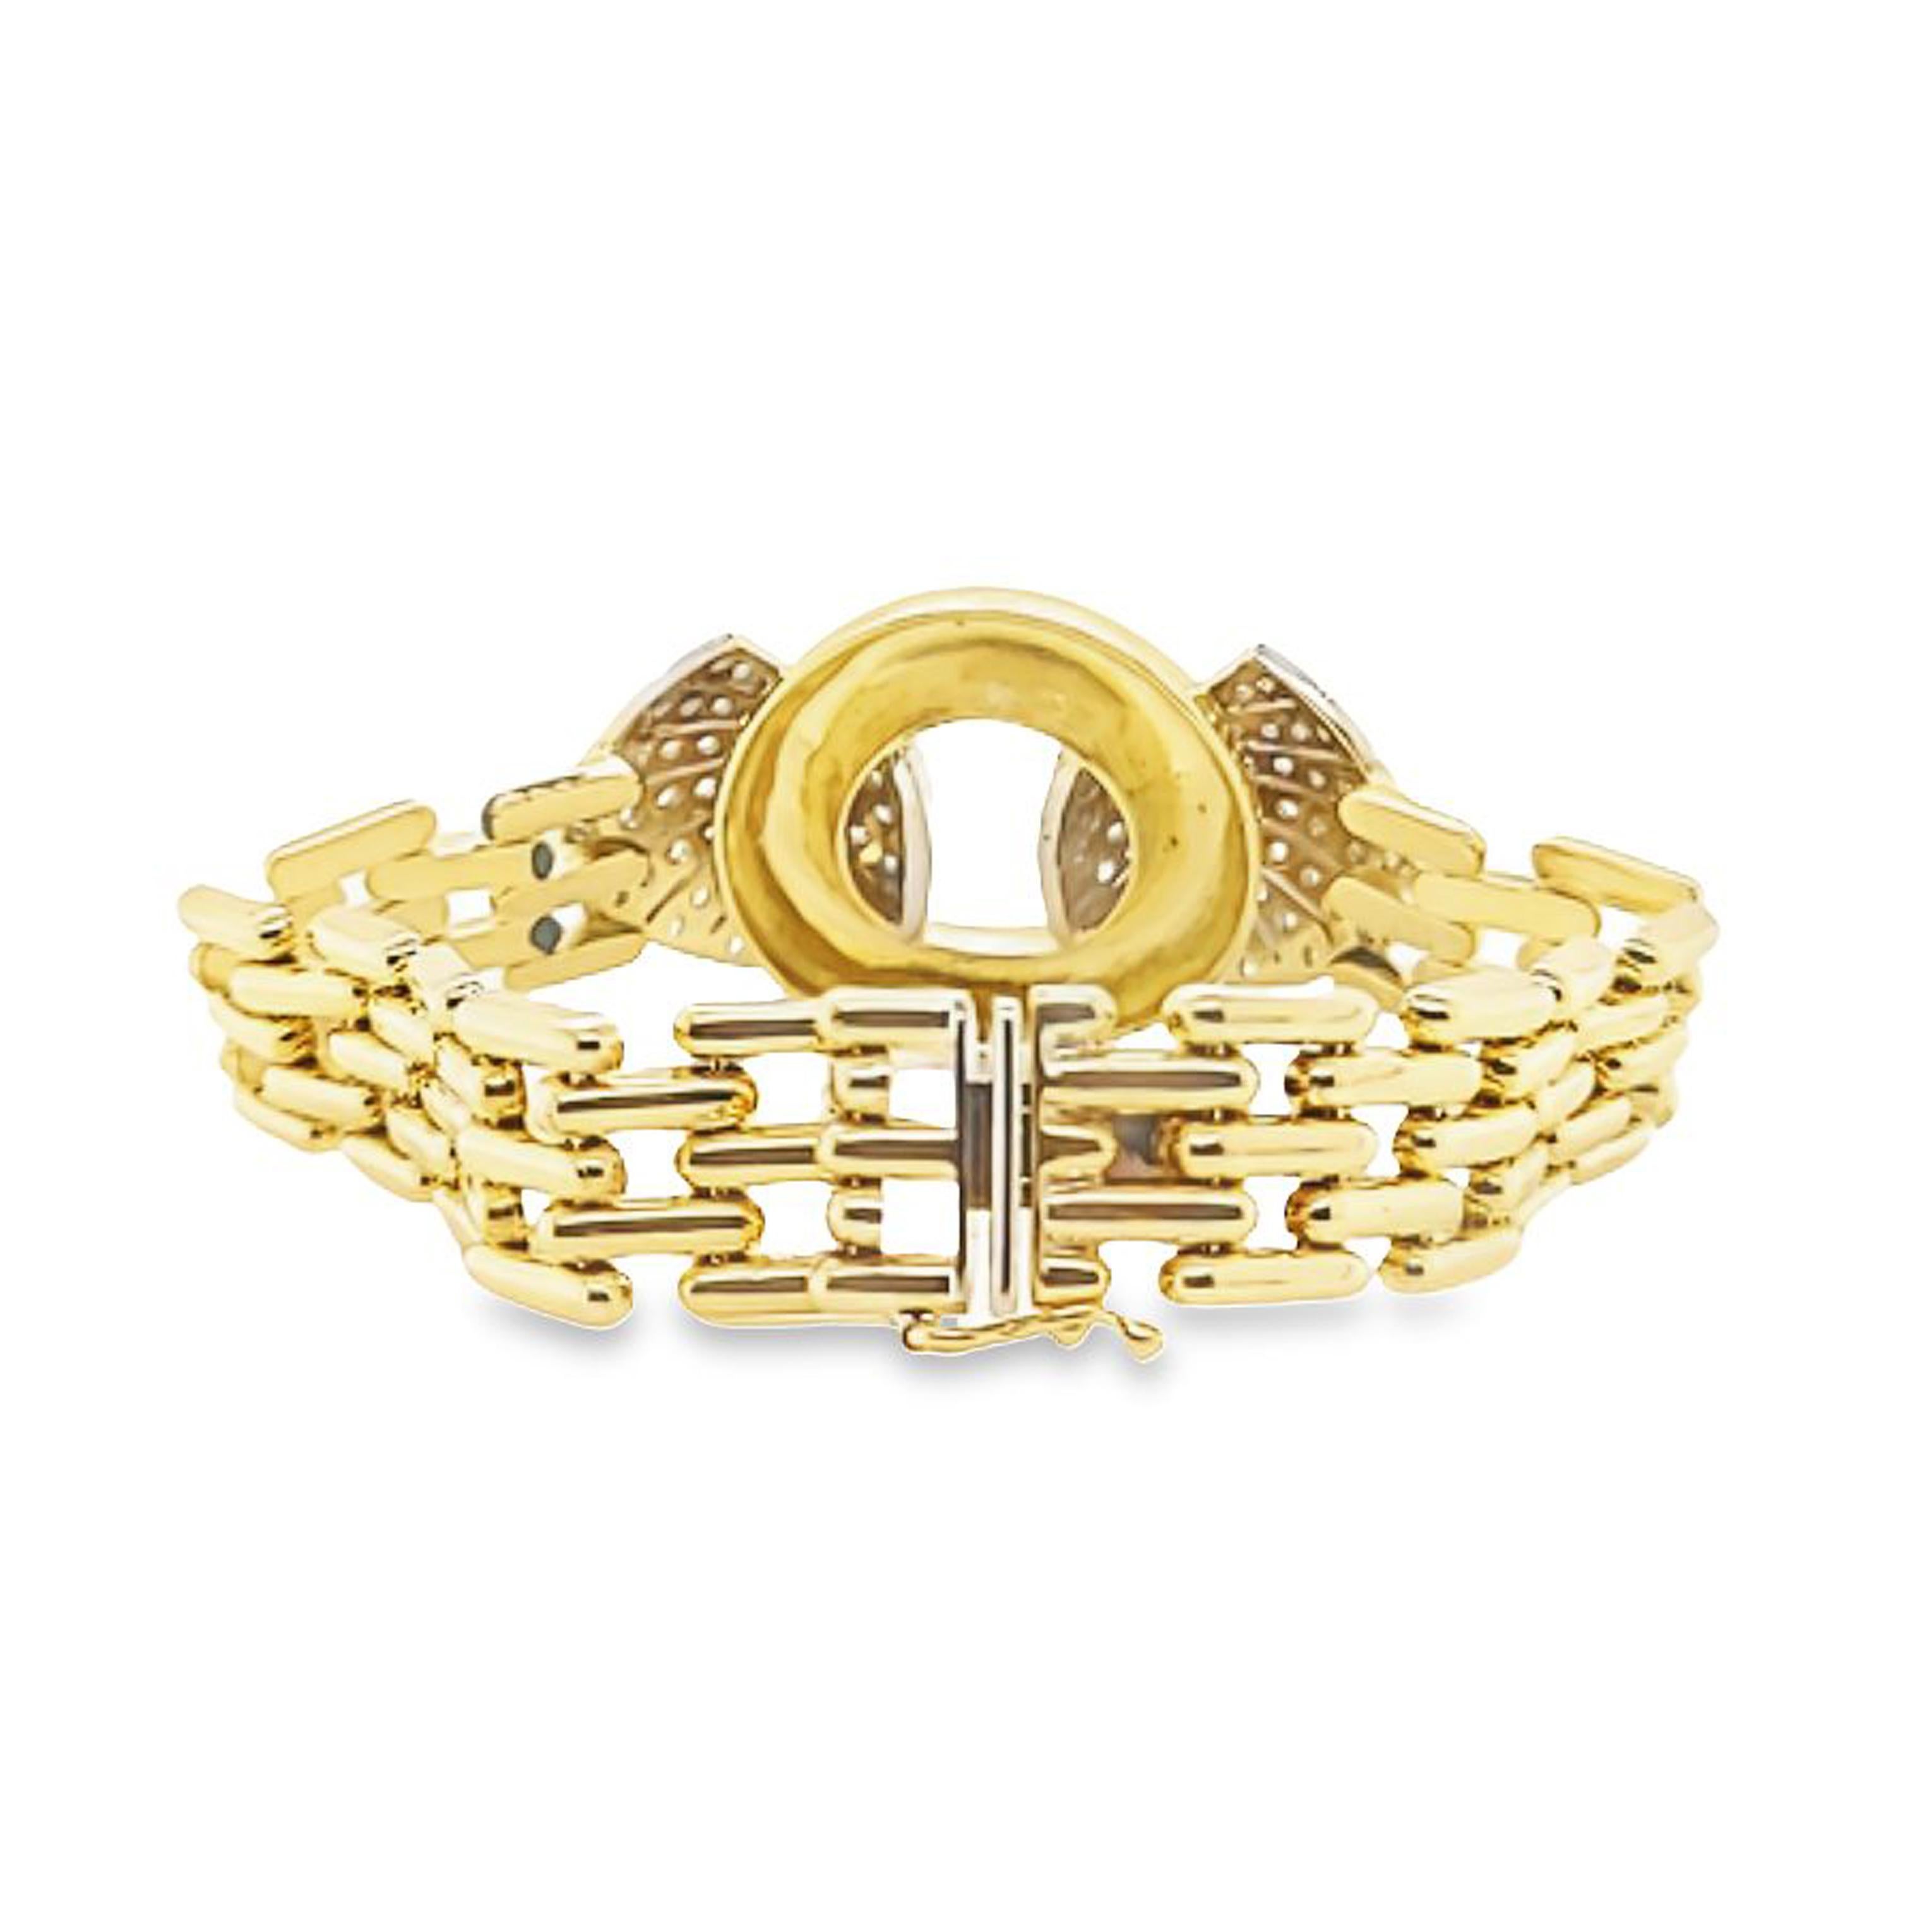 Retro Diamond Spray Bracelet with Rectangular Links In Good Condition For Sale In Coral Gables, FL